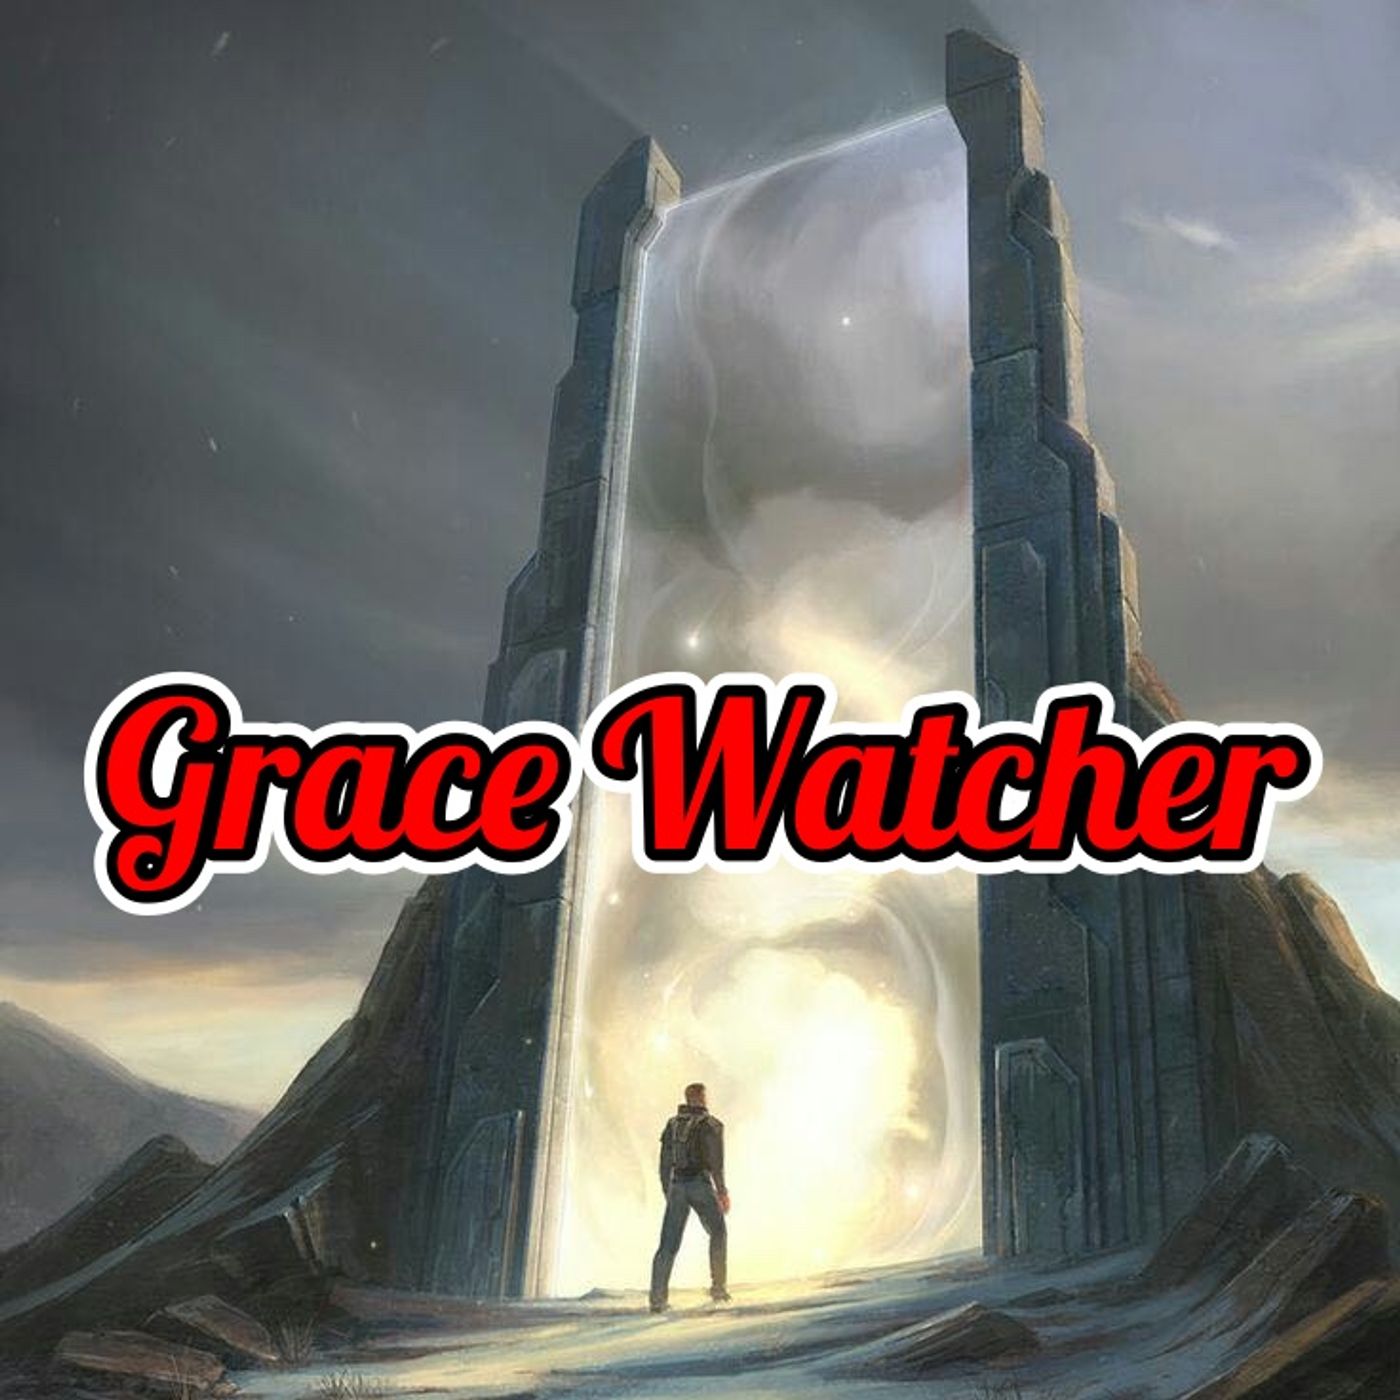 Grace Watcher Worship - I See The Lord High And Lifted Up, And The Angels Cried Holy